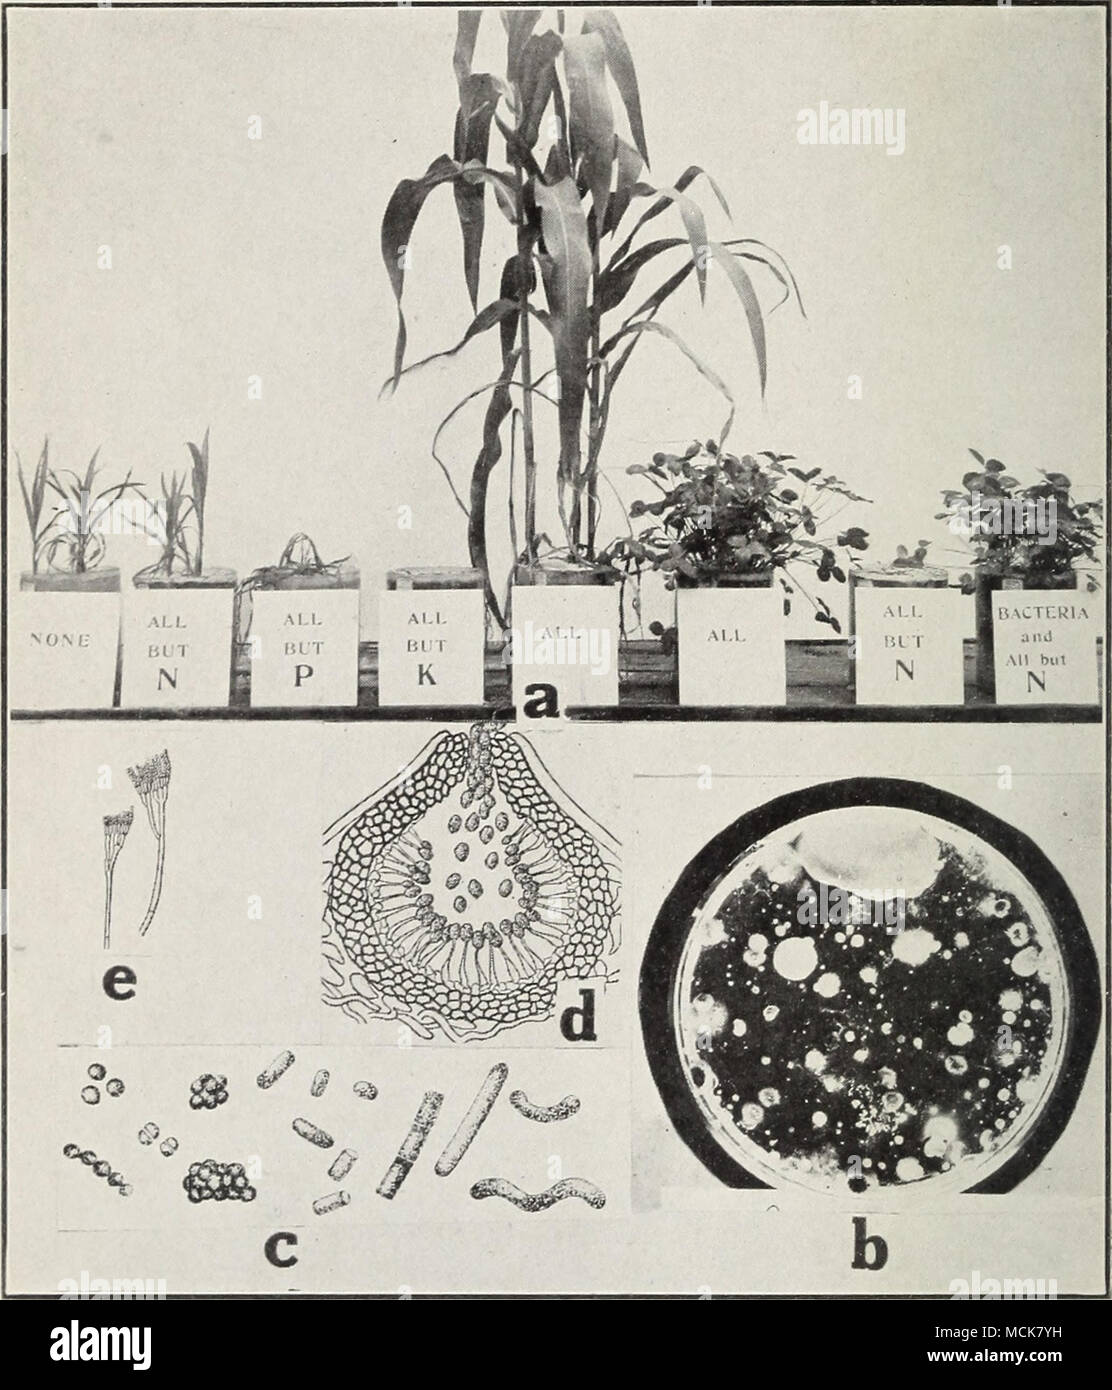 . Fig. 2. a. Effect of a balanced fertilizer on corn and clover, b, various organisms isolated from a soil particle, c. types of bacteria, Coccus, Bacillus and Spirilla (after P. E. Brown); d. pycnidium (after C. L. Shear), e. conidiophores of Penicillium. Stock Photo